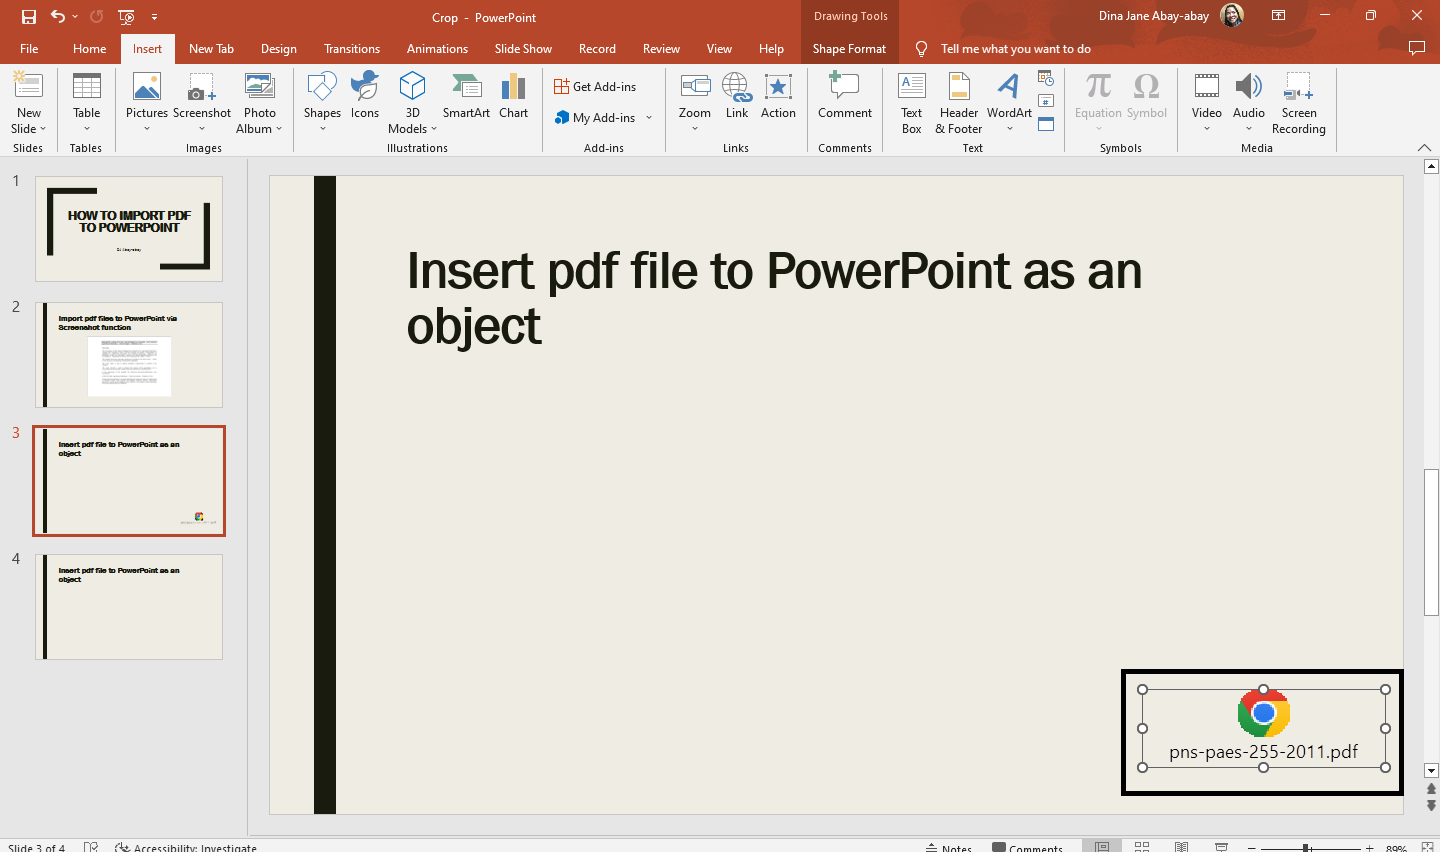 You now have insert object box to your PowerPoint file.